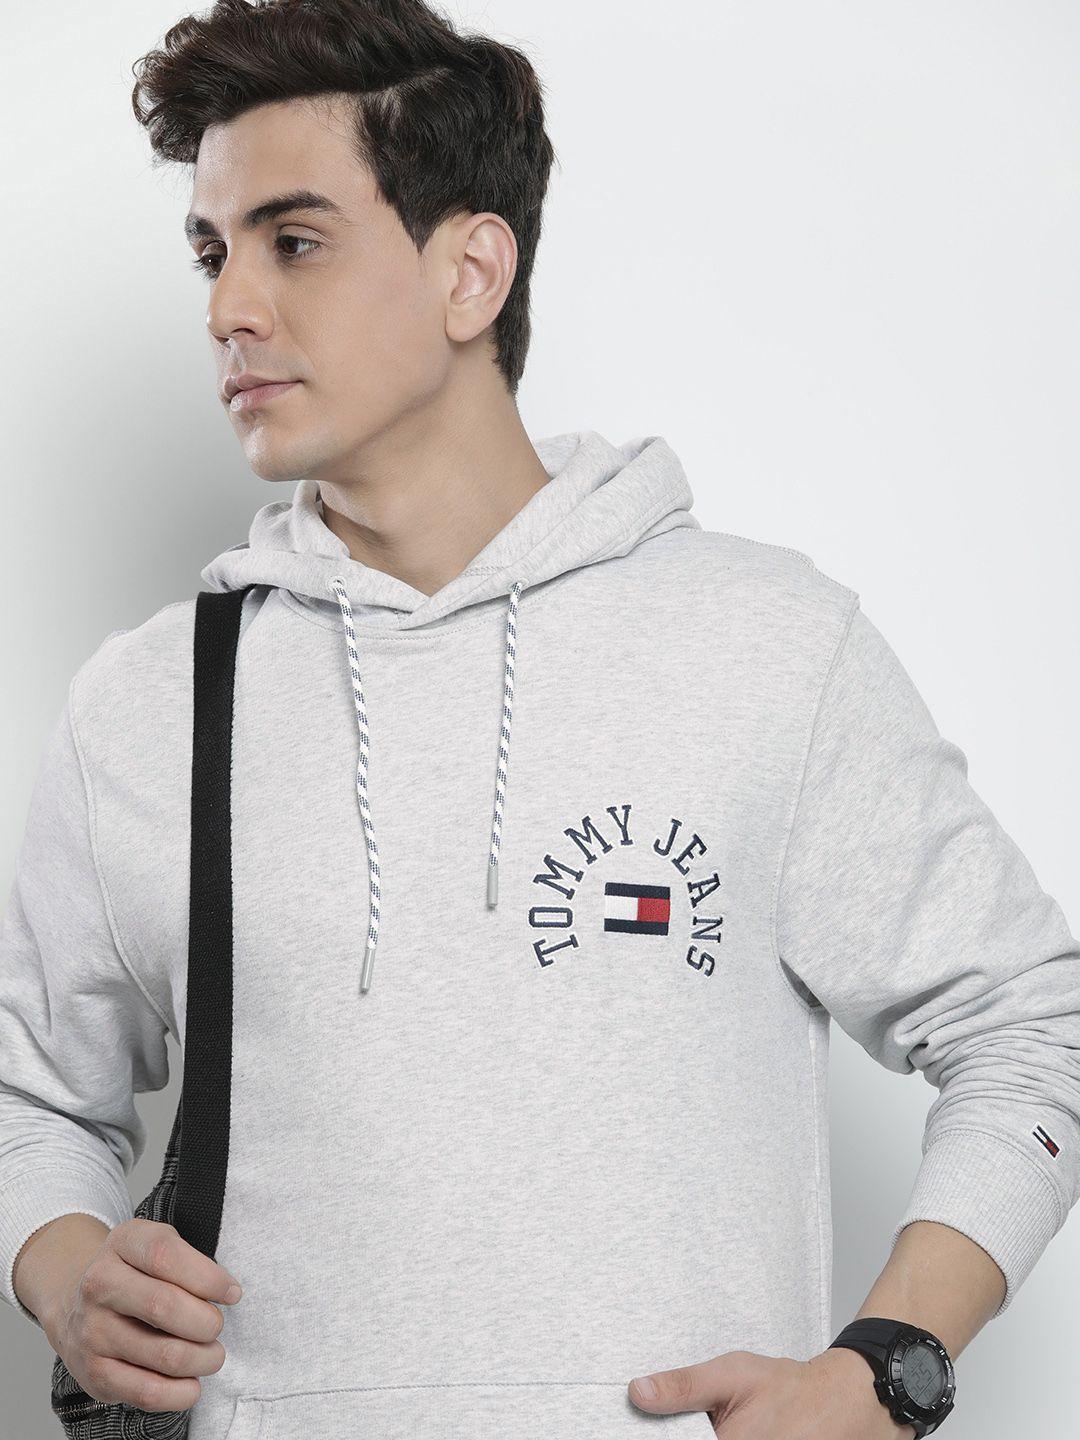 tommy hilfiger brand logo embroidered pure cotton hooded sweatshirt